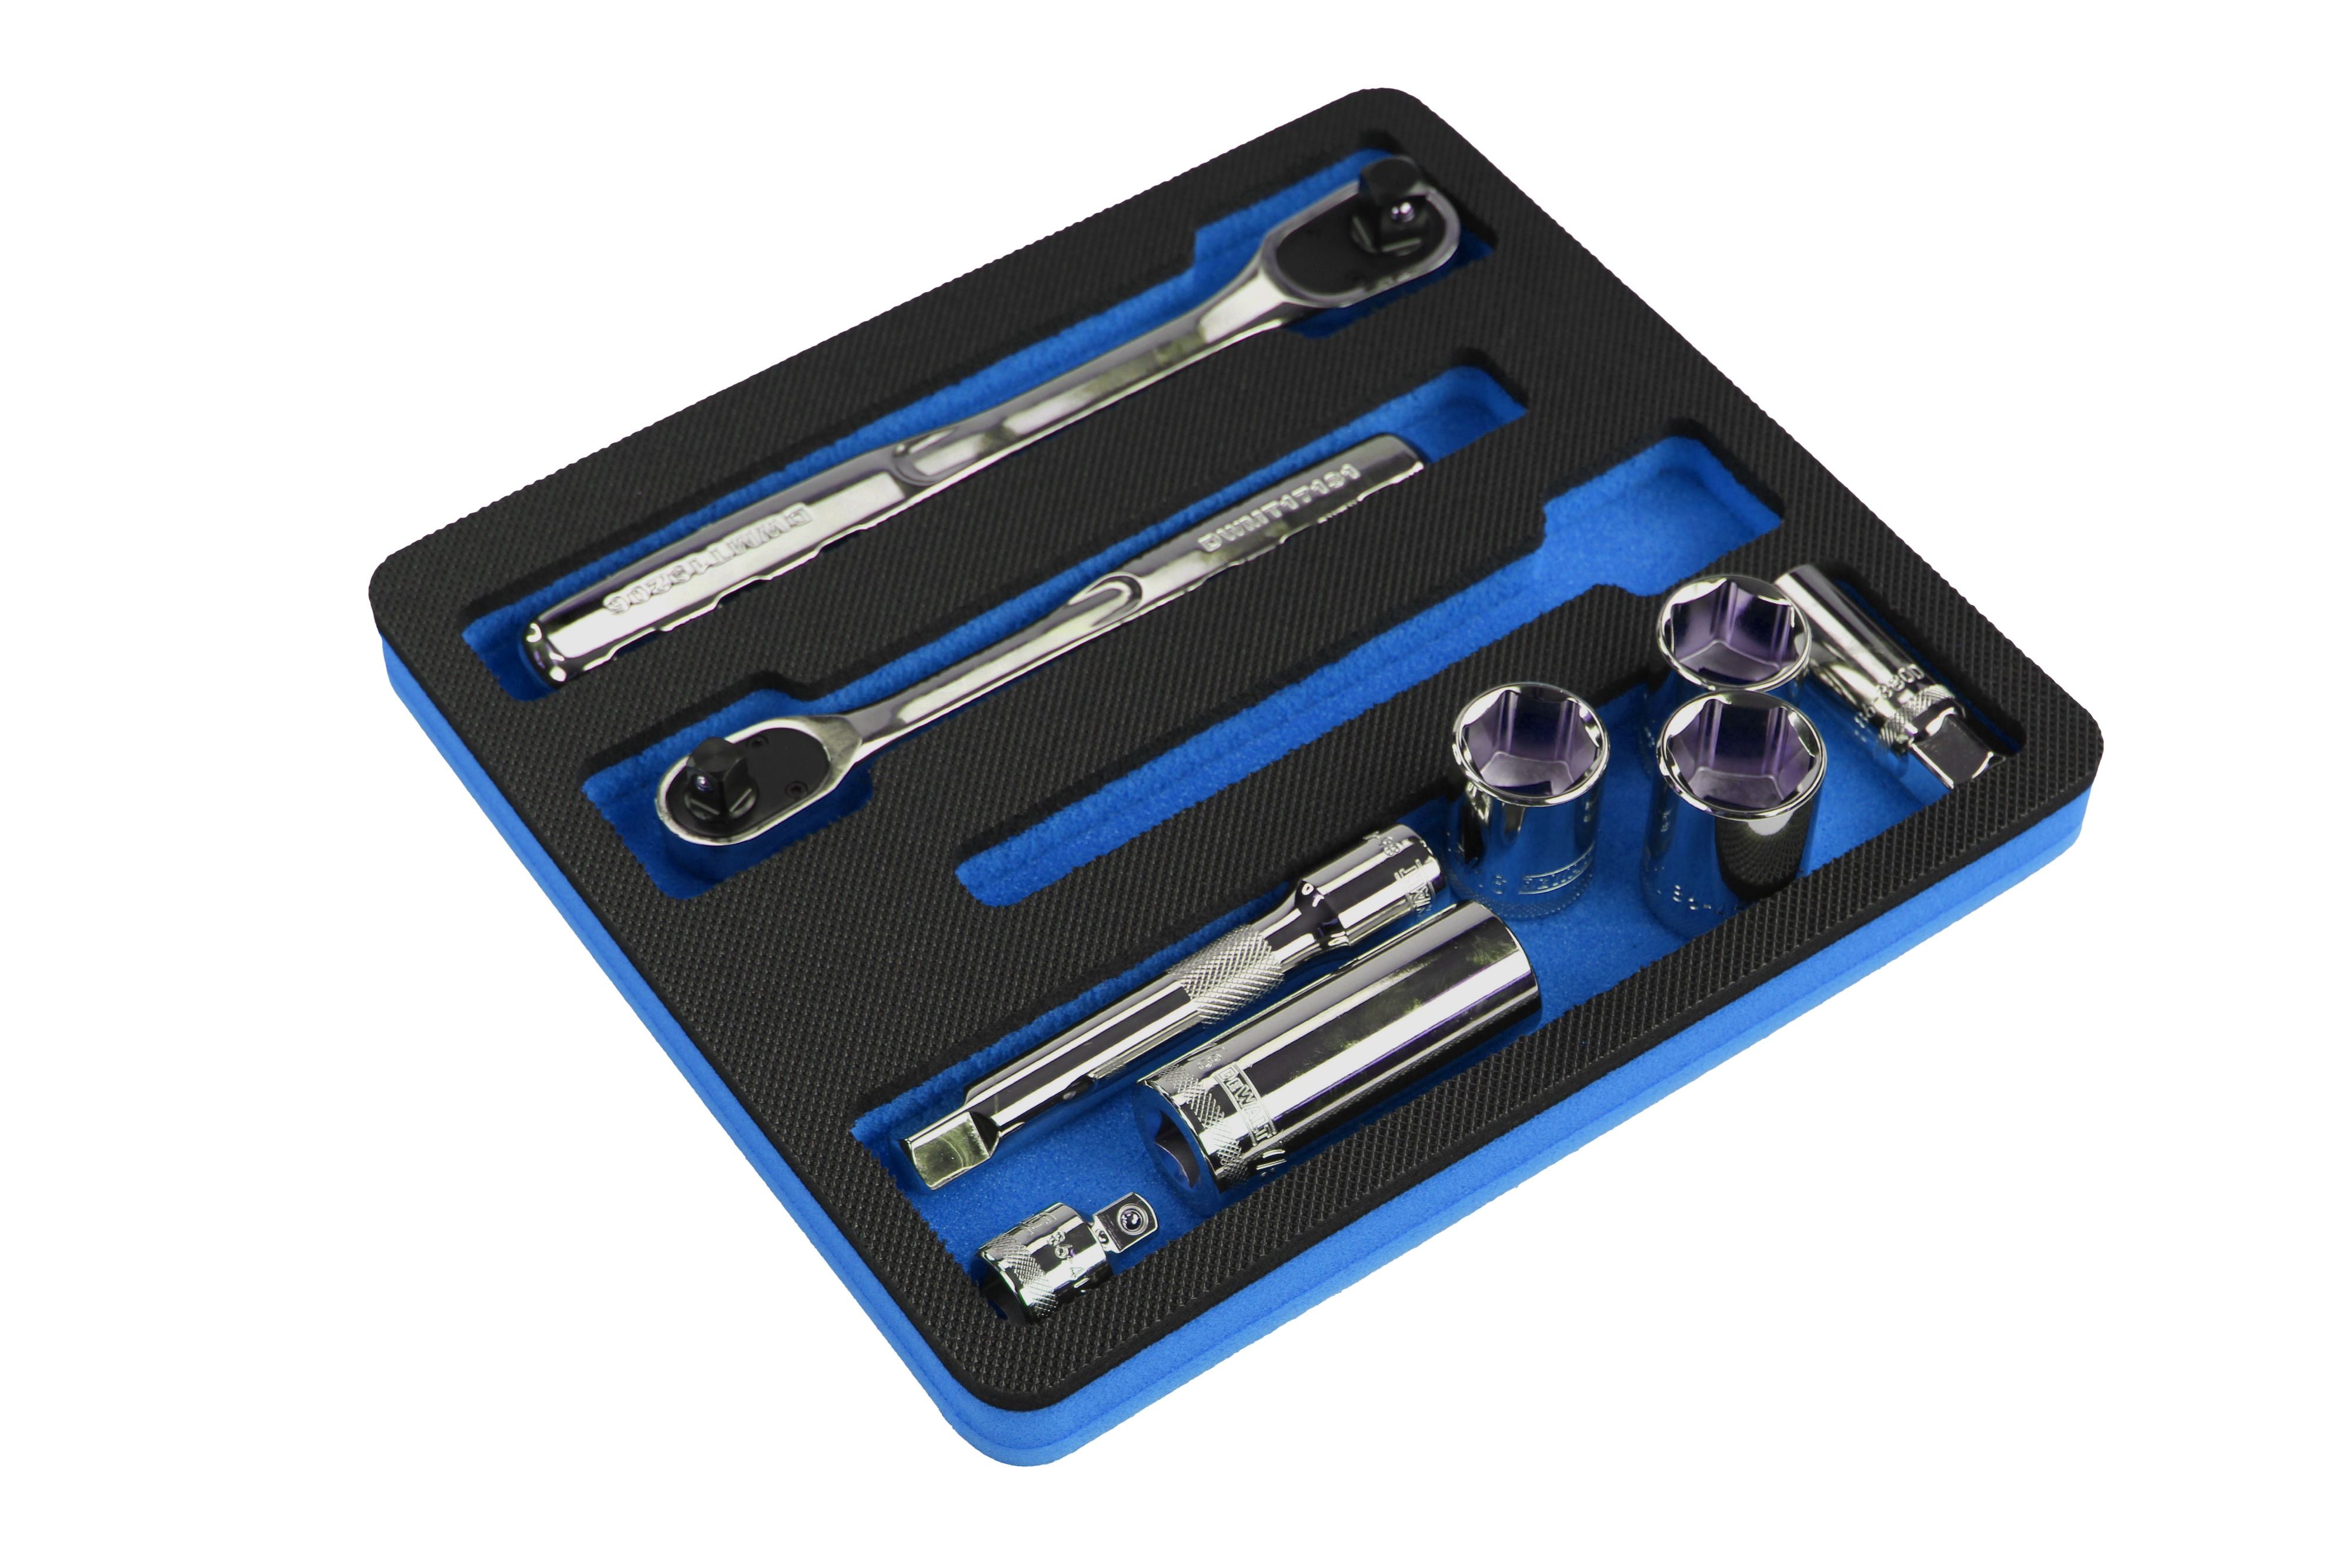 Tool Drawer Organizer Ratchet Socket Wrench Holder Insert Blue Black Durable Foam Tray Holds 3 Ratchets or Extensions Up To 10 Inches Long Fits Craftsman Husky Kobalt Milwaukee Many More